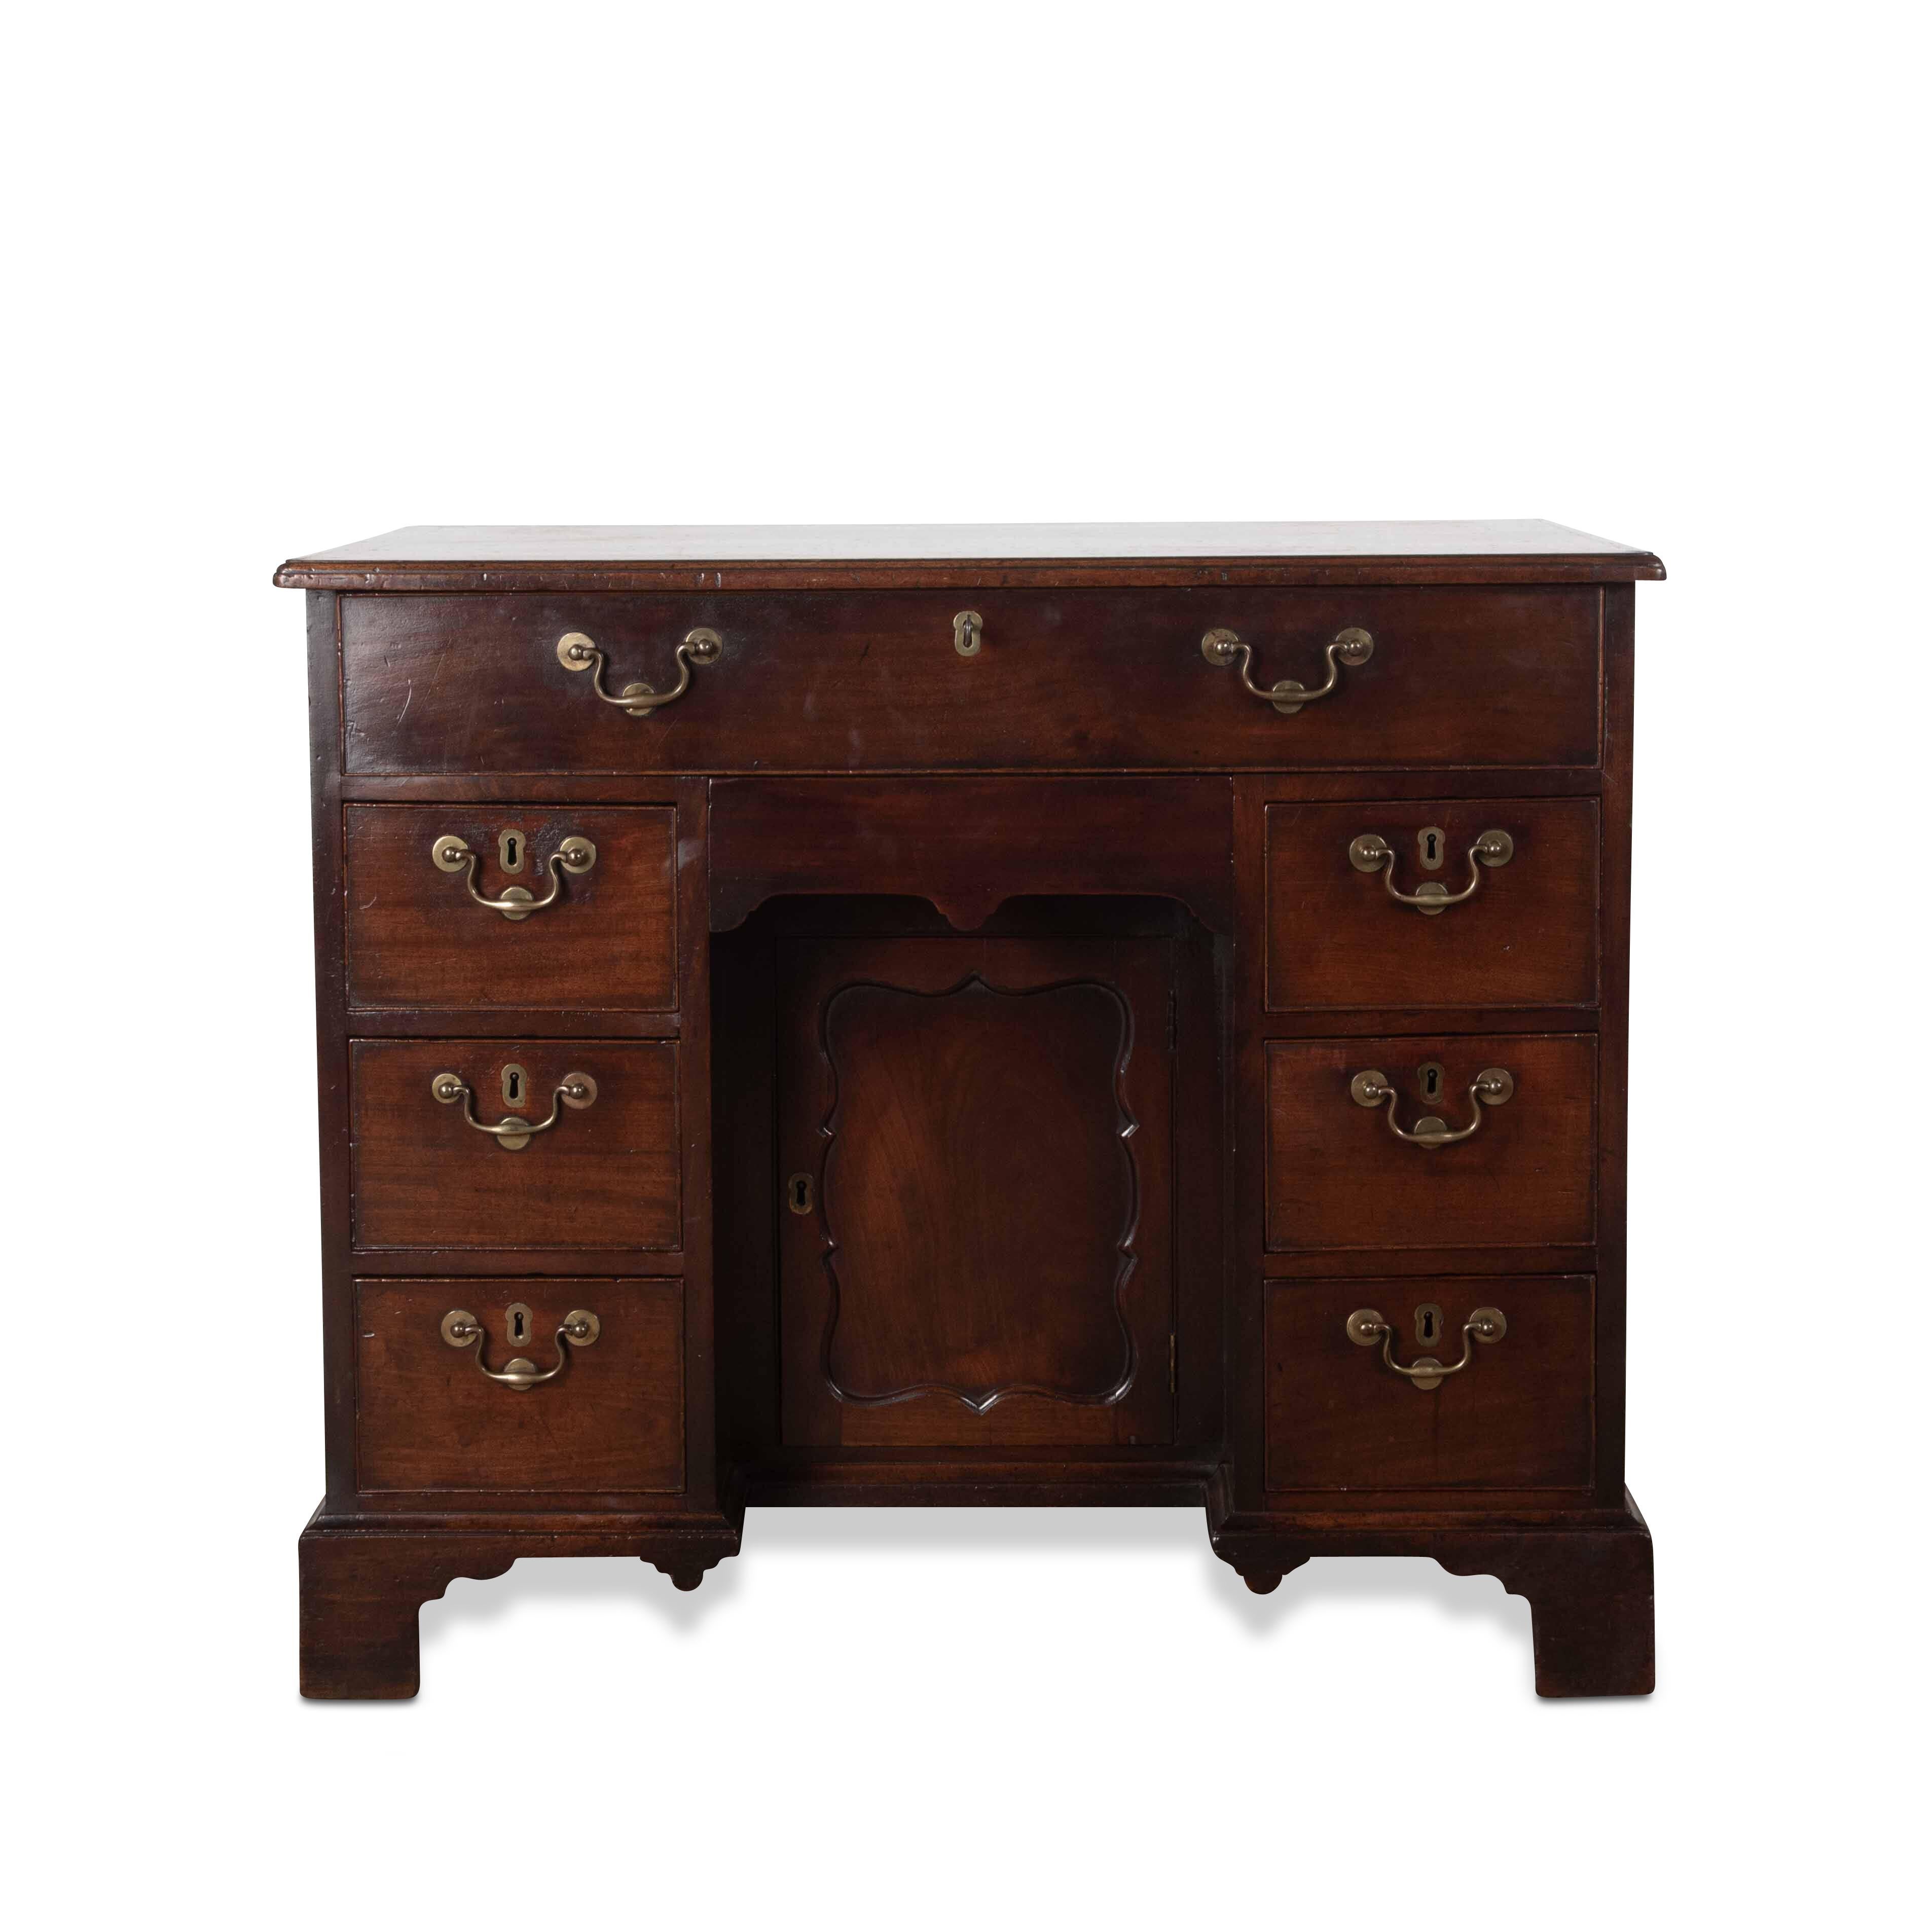 English C18th Mahogany `Grendy` Kneehole Desk For Sale